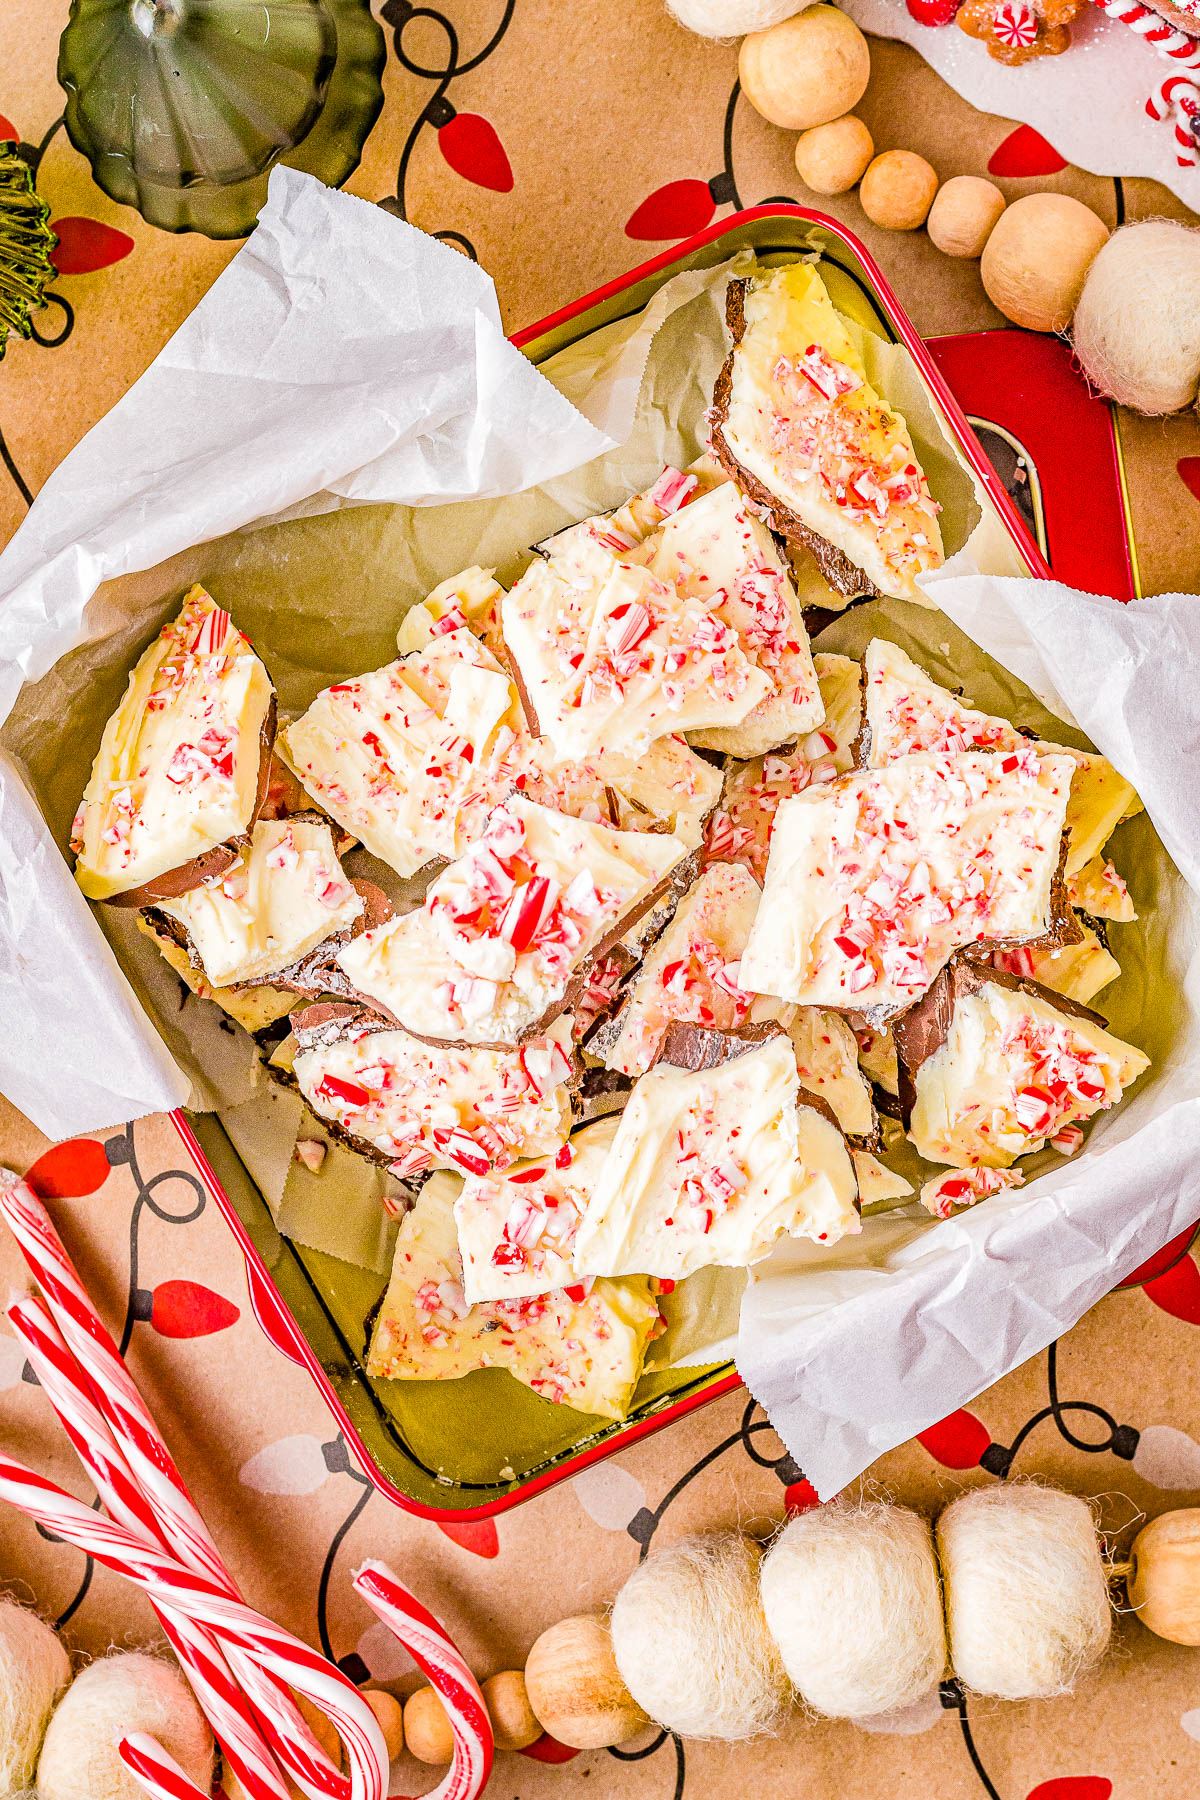 Peppermint Bark - An EASY, no-bake, and make-ahead recipe for homemade peppermint bark! This classic Christmas candy never goes out of style and is perfect for gifting, holiday parties, or cookie exchanges! No one can resist a piece of this festive looking and oh-so-pepperminty treat made with both semi-sweet and white chocolate, and crushed peppermints! 